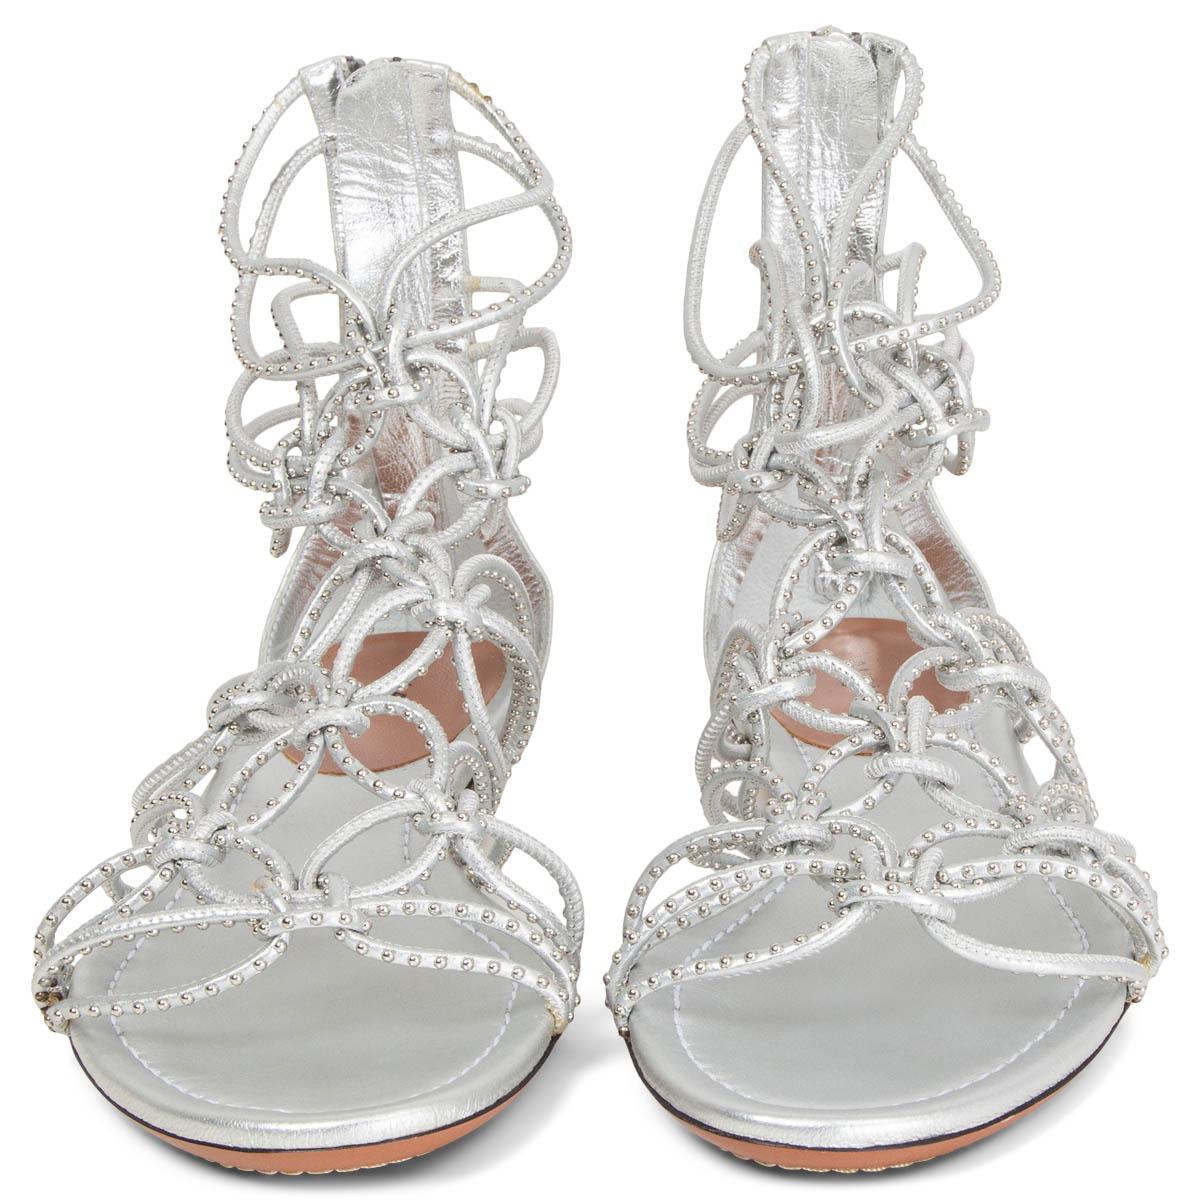 100% authentic Alaïa strappy flat sandals in metallic silver leather embellished with silver-tone studs. Open with a zipper at the heel. Brand new. Come with dust bag. 

Measurements
Imprinted Size	38
Shoe Size	38
Inside Sole	25cm